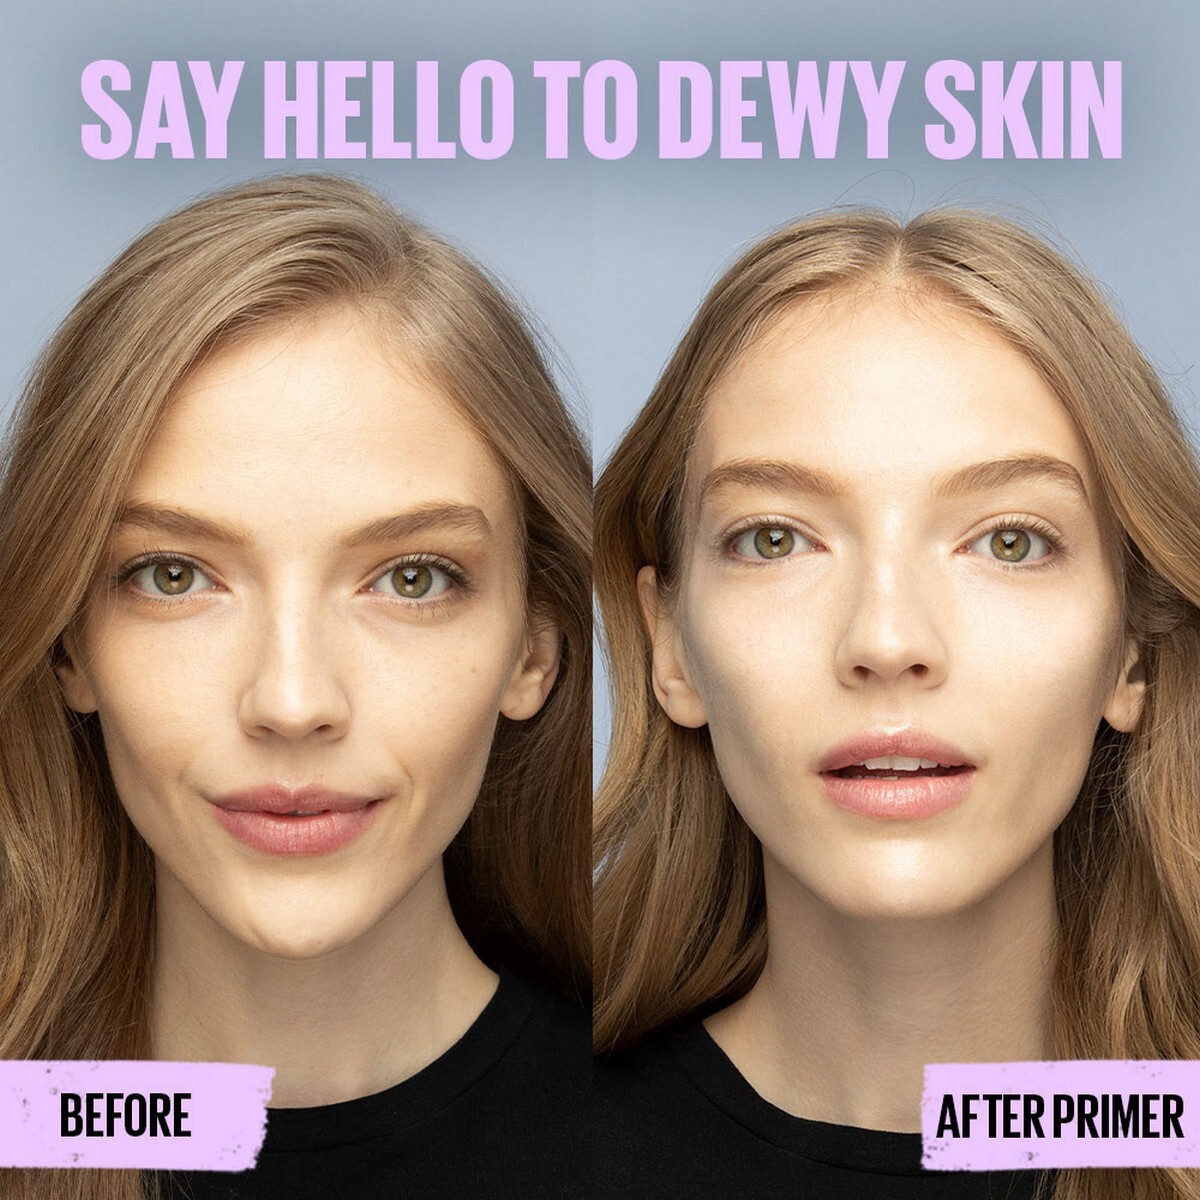 Maybelline New York Fit Me Primer Dewy + Smooth - Get Long Lasting Makeup with Maybelline Primer, a Gel Primer That Helps Your Makeup Stay Flawless, Smooth & Dewy